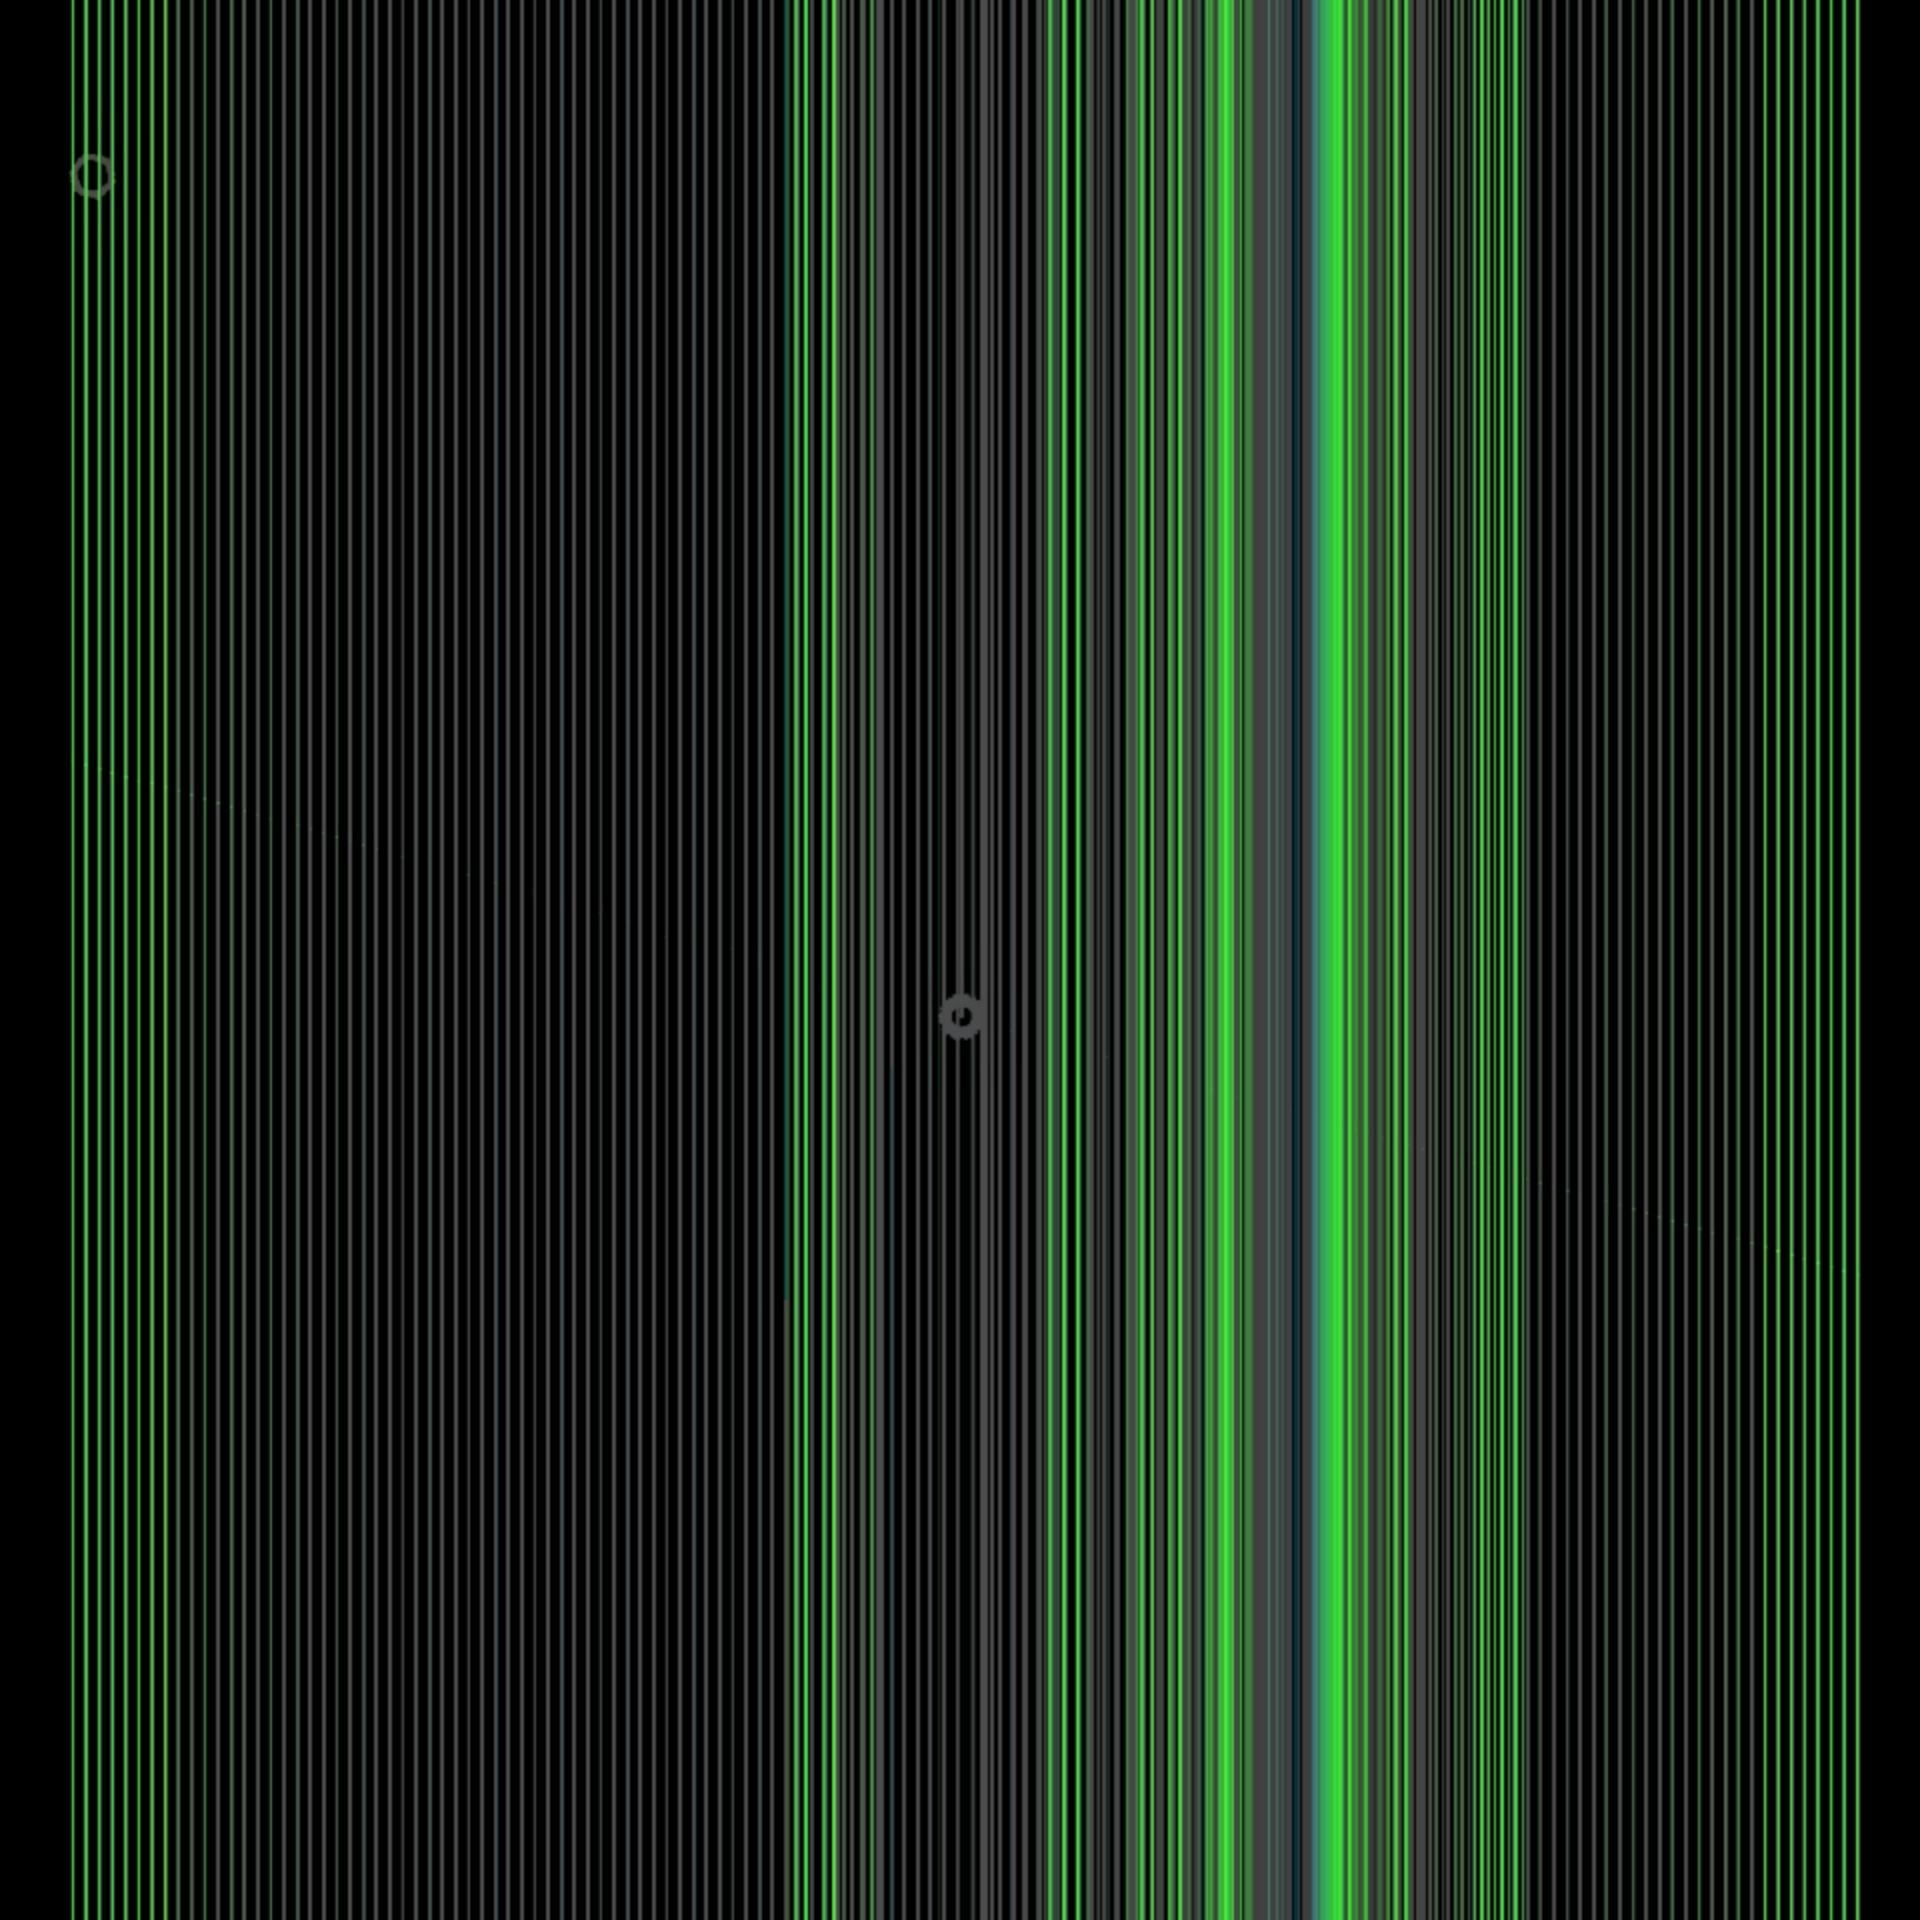 wallpaper with green vertical lines on black background